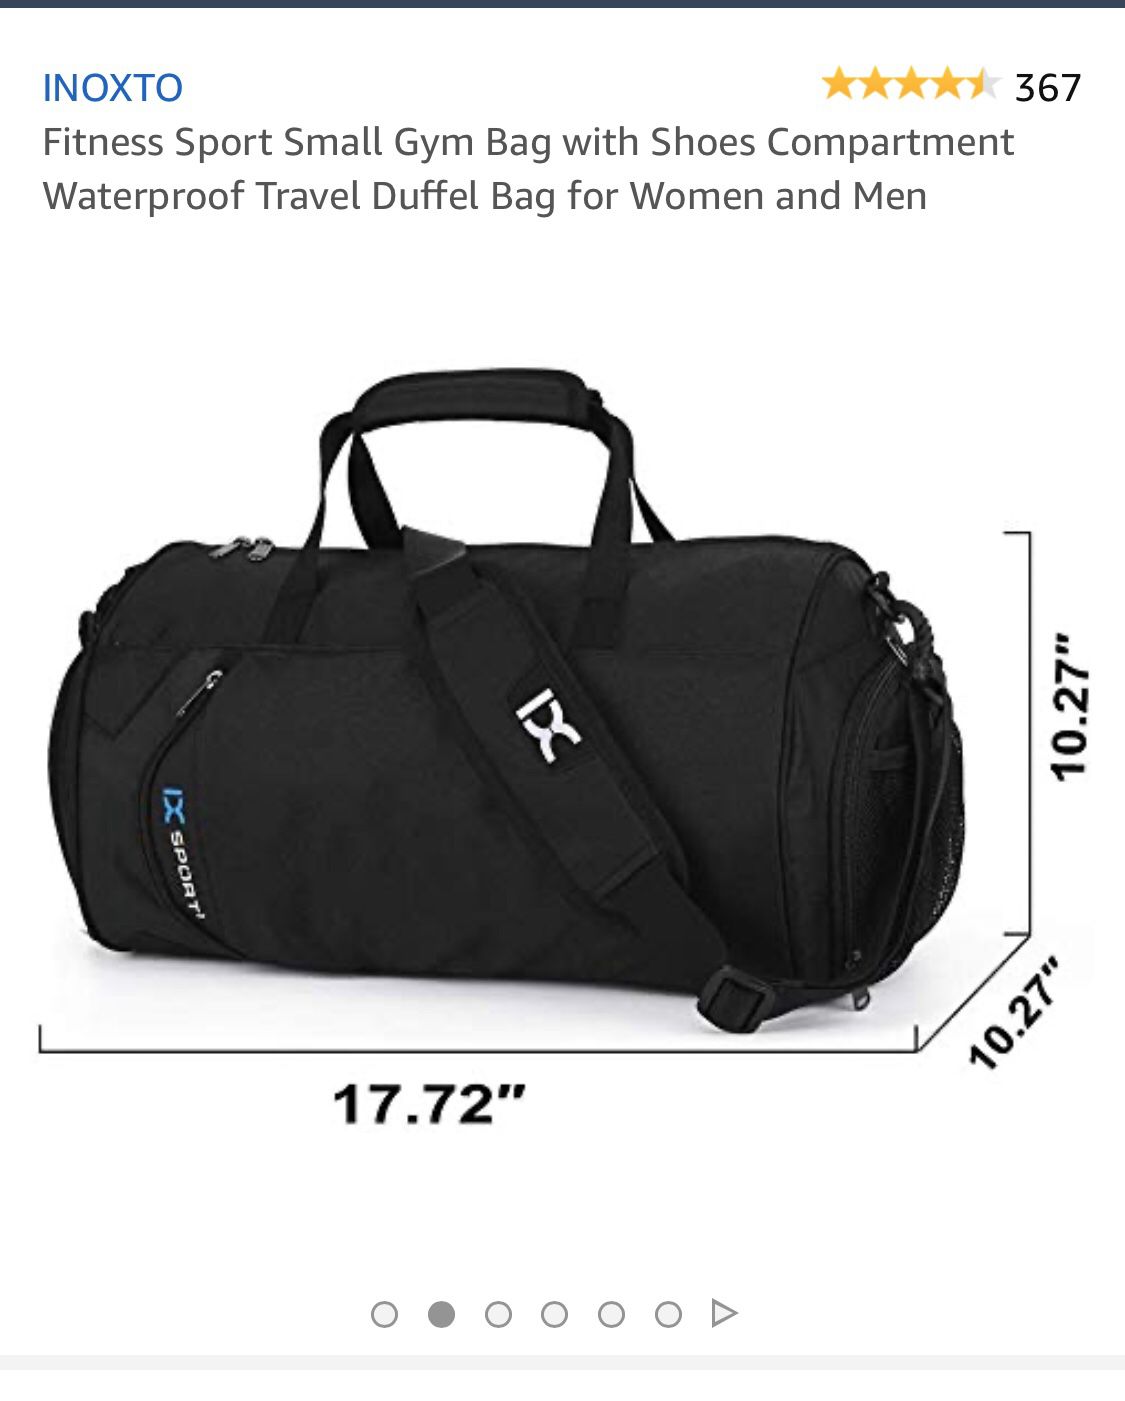 Gym Bag for and Woman with Shoe Compartment. Waterproof Travel Duffle Bag!